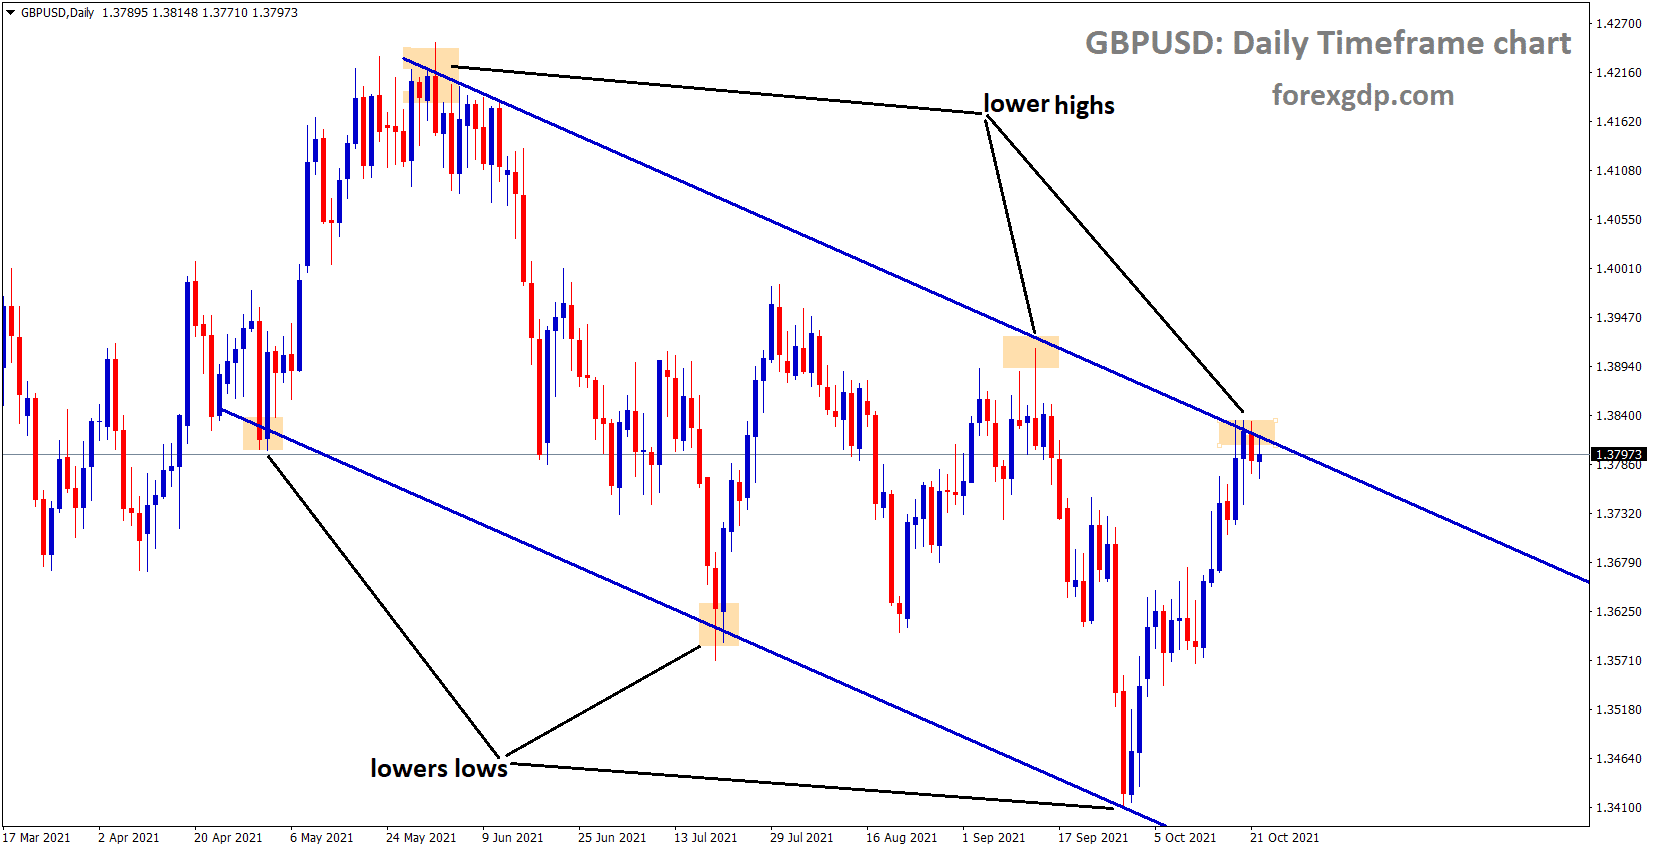 GBPUSD is standing exactly at the lower high area of the descending channel